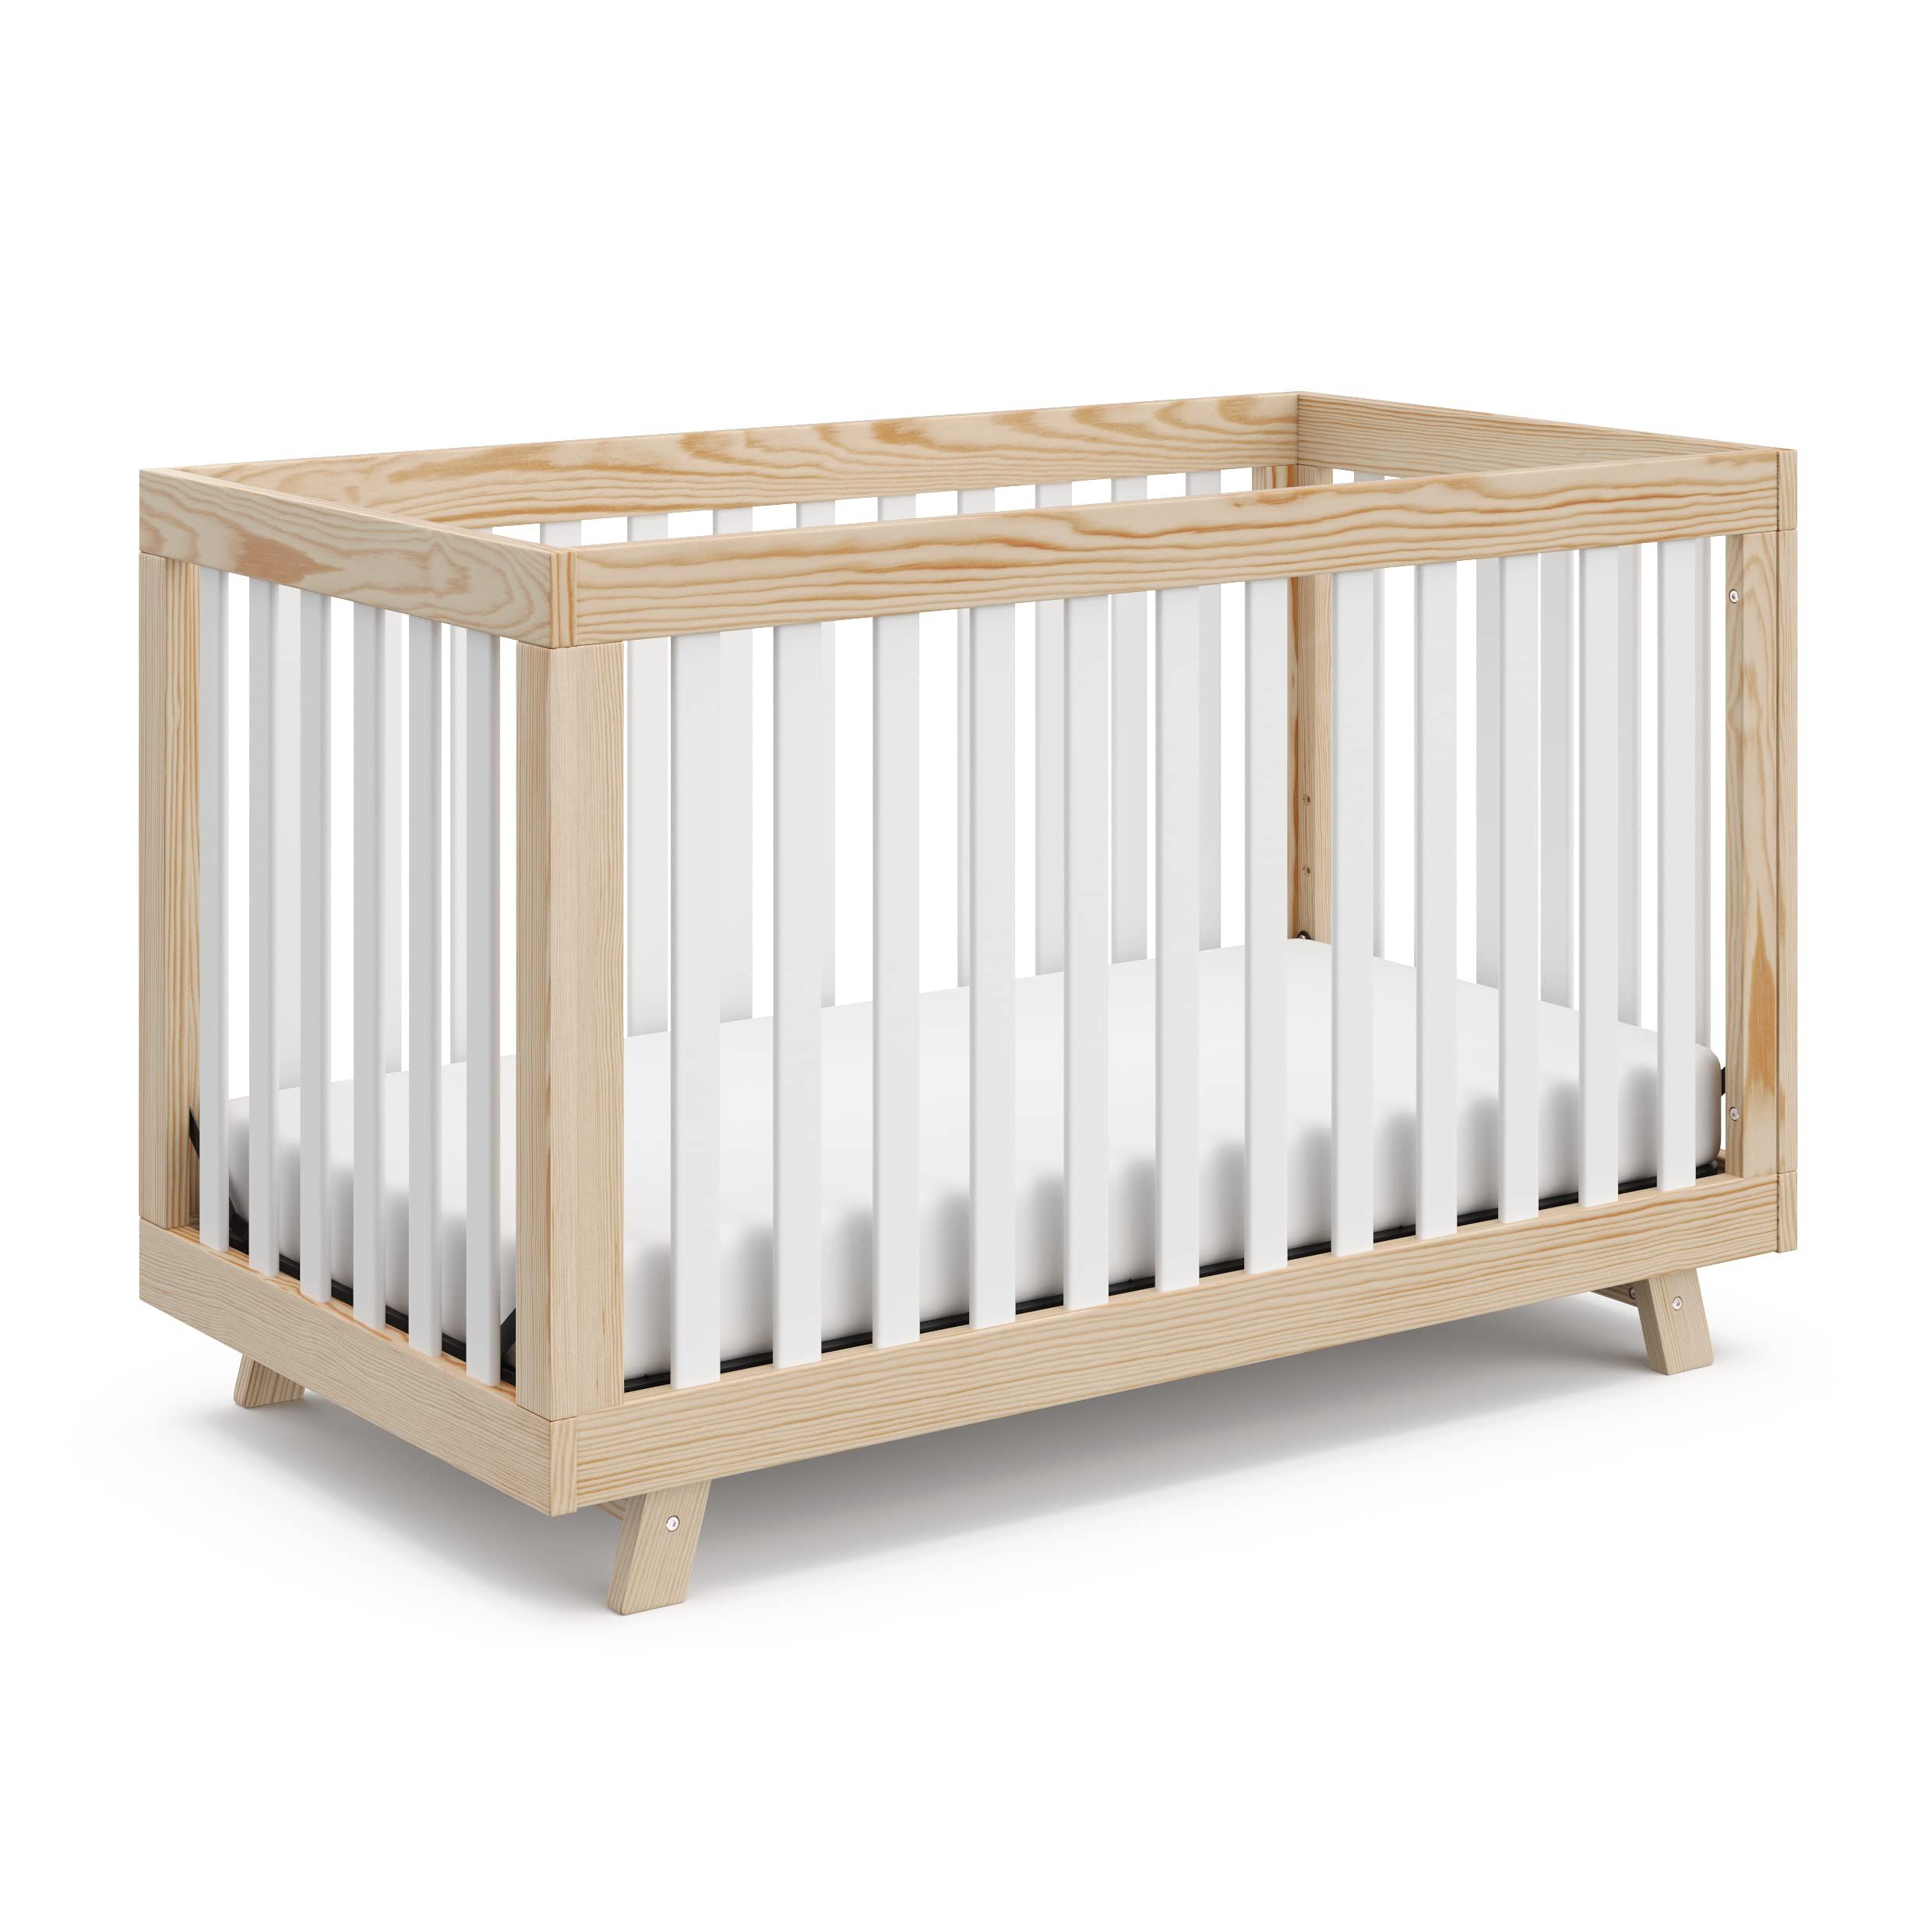 Storkcraft Beckett 3-in-1 Convertible Crib (Natural with White Slats) – Converts from Baby Crib to T | Amazon (US)